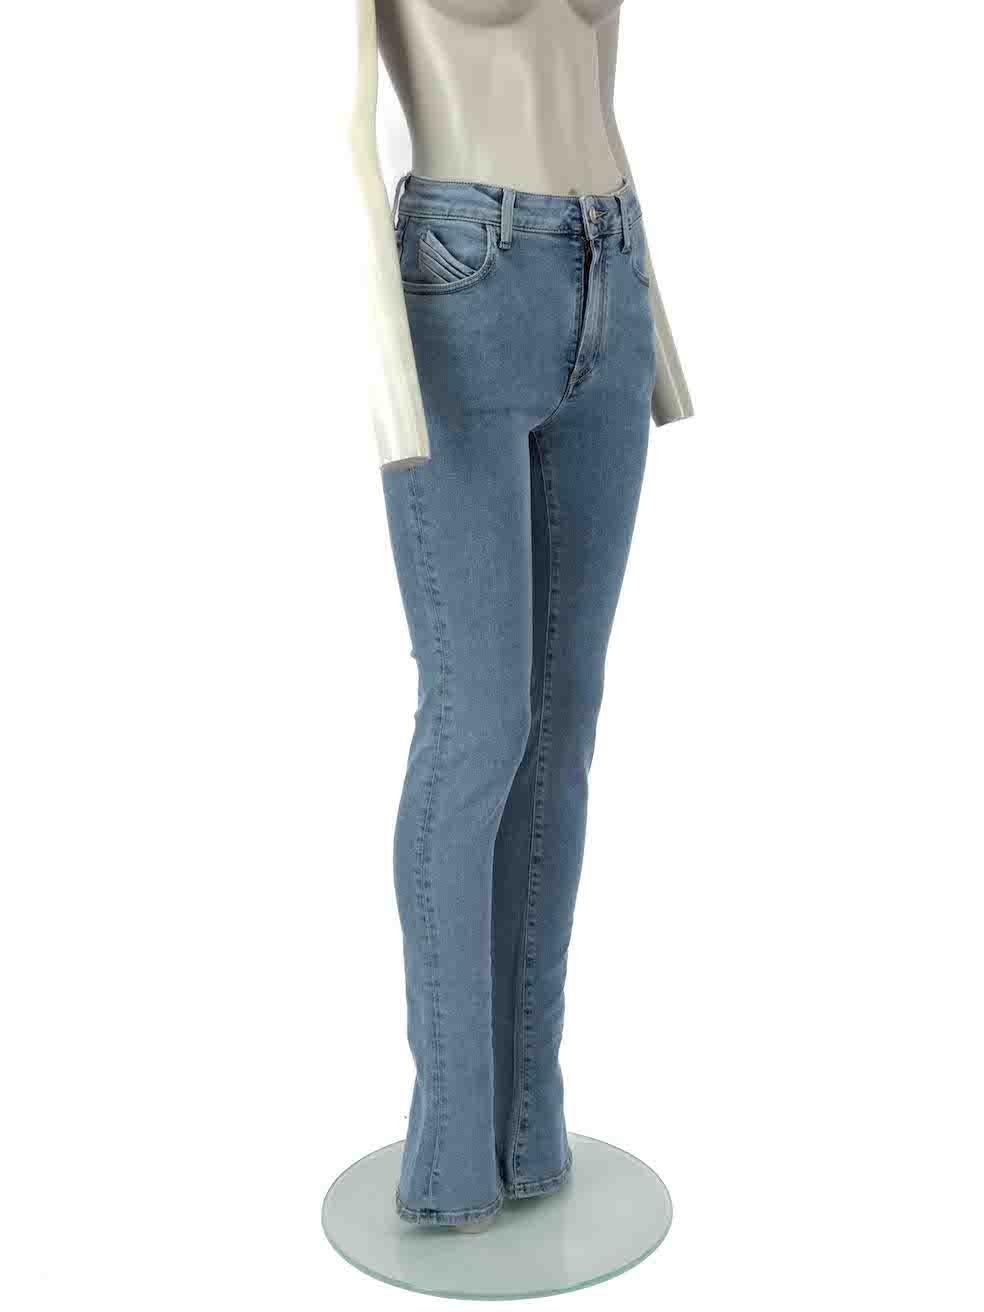 CONDITION is Very good. Hardly any visible wear to jeans is evident on this used The Attico designer resale item.
 
Details
Blue
Denim
Jeans
Straight leg
Flared cuff detail
3x Front pockets
2x Back pockets
Fly zip and button fastening

Made in